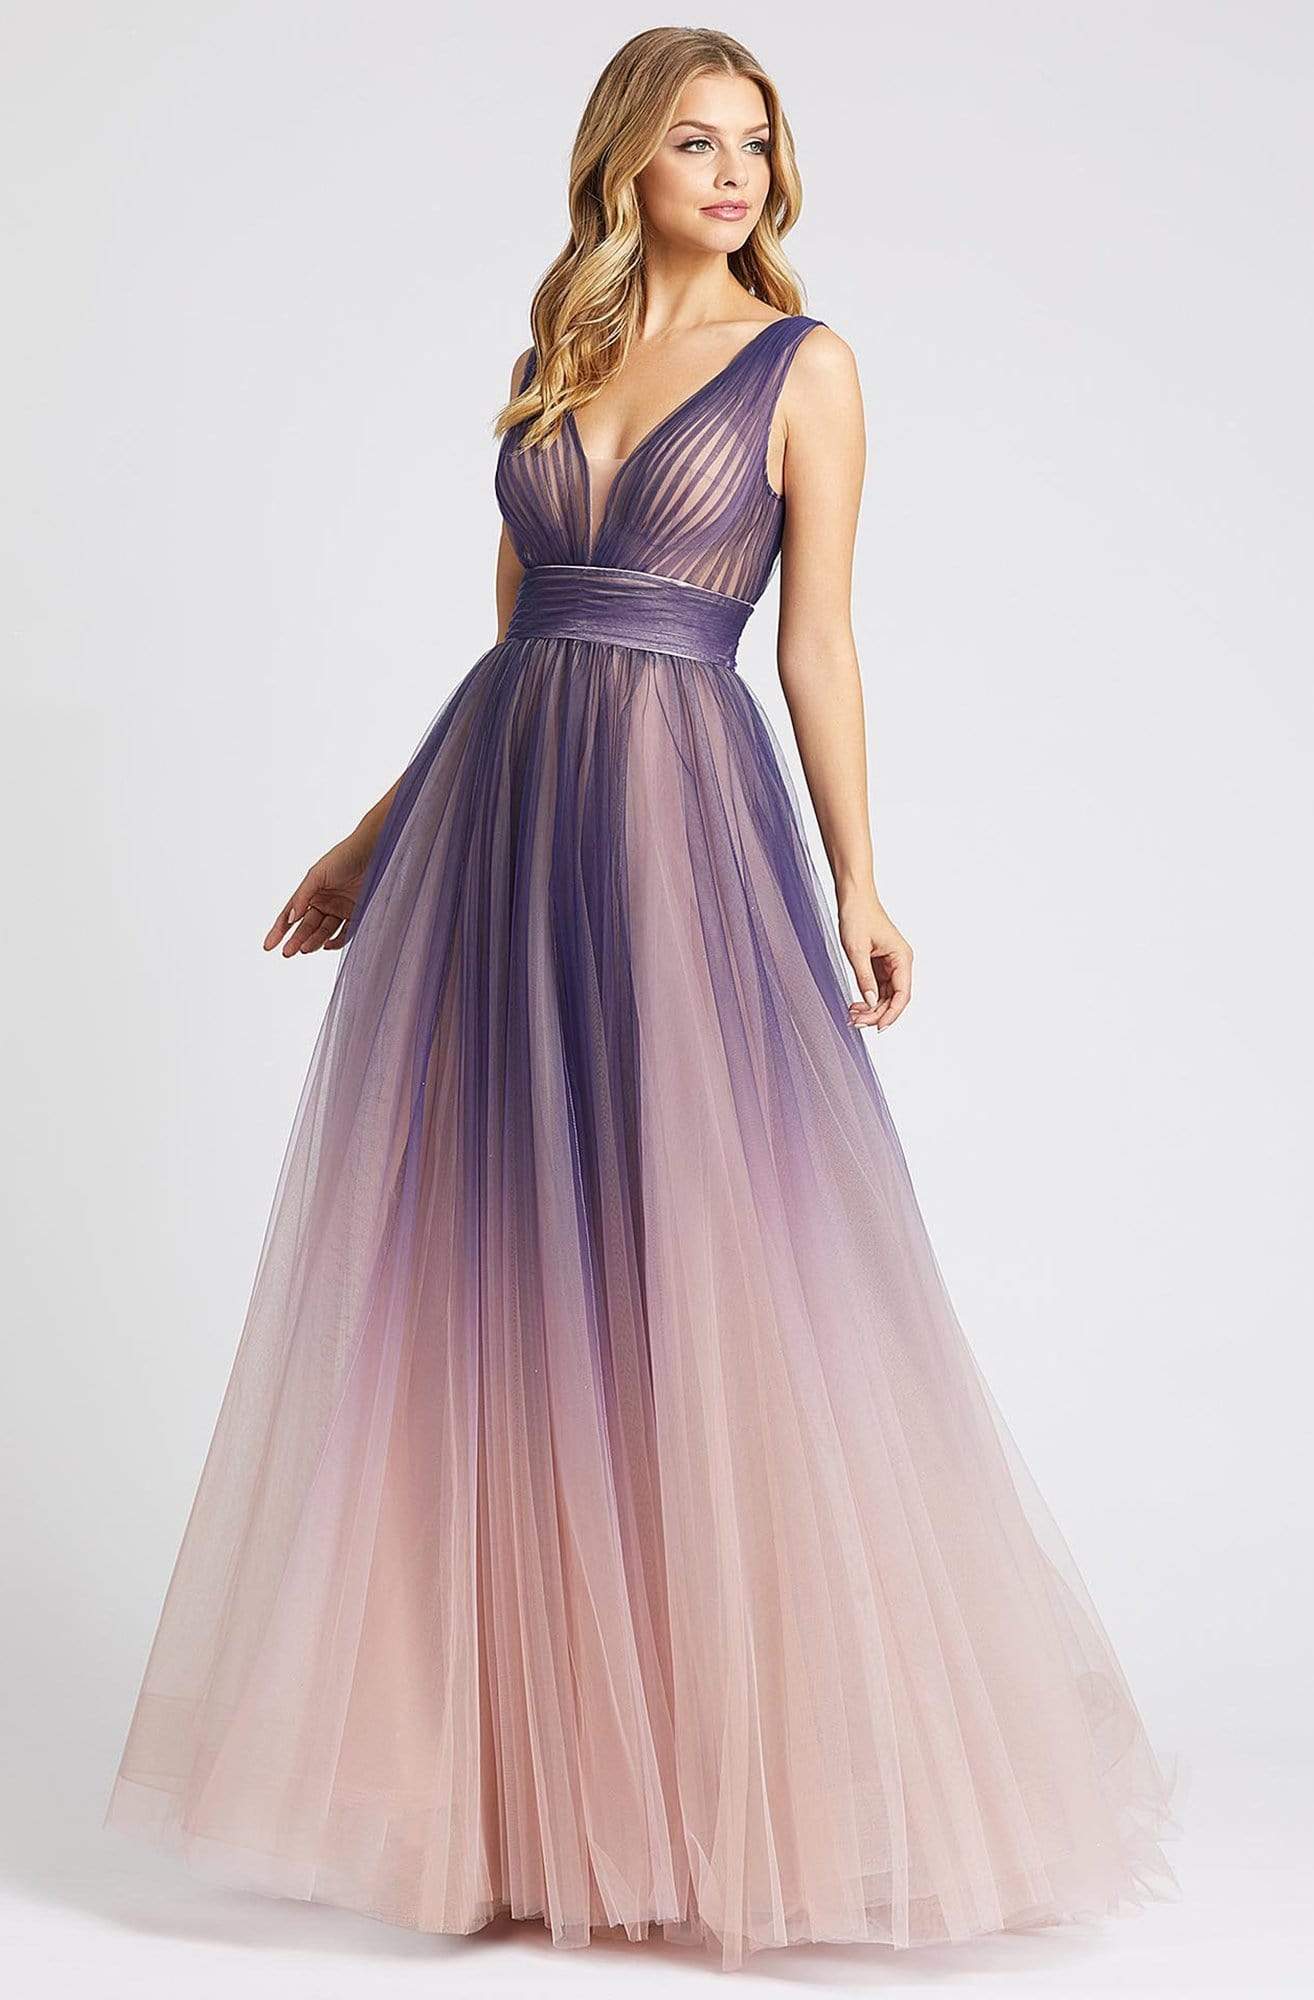 Ieena Duggal - 20221I Plunging V-Neck Pleated Ombre Gown
